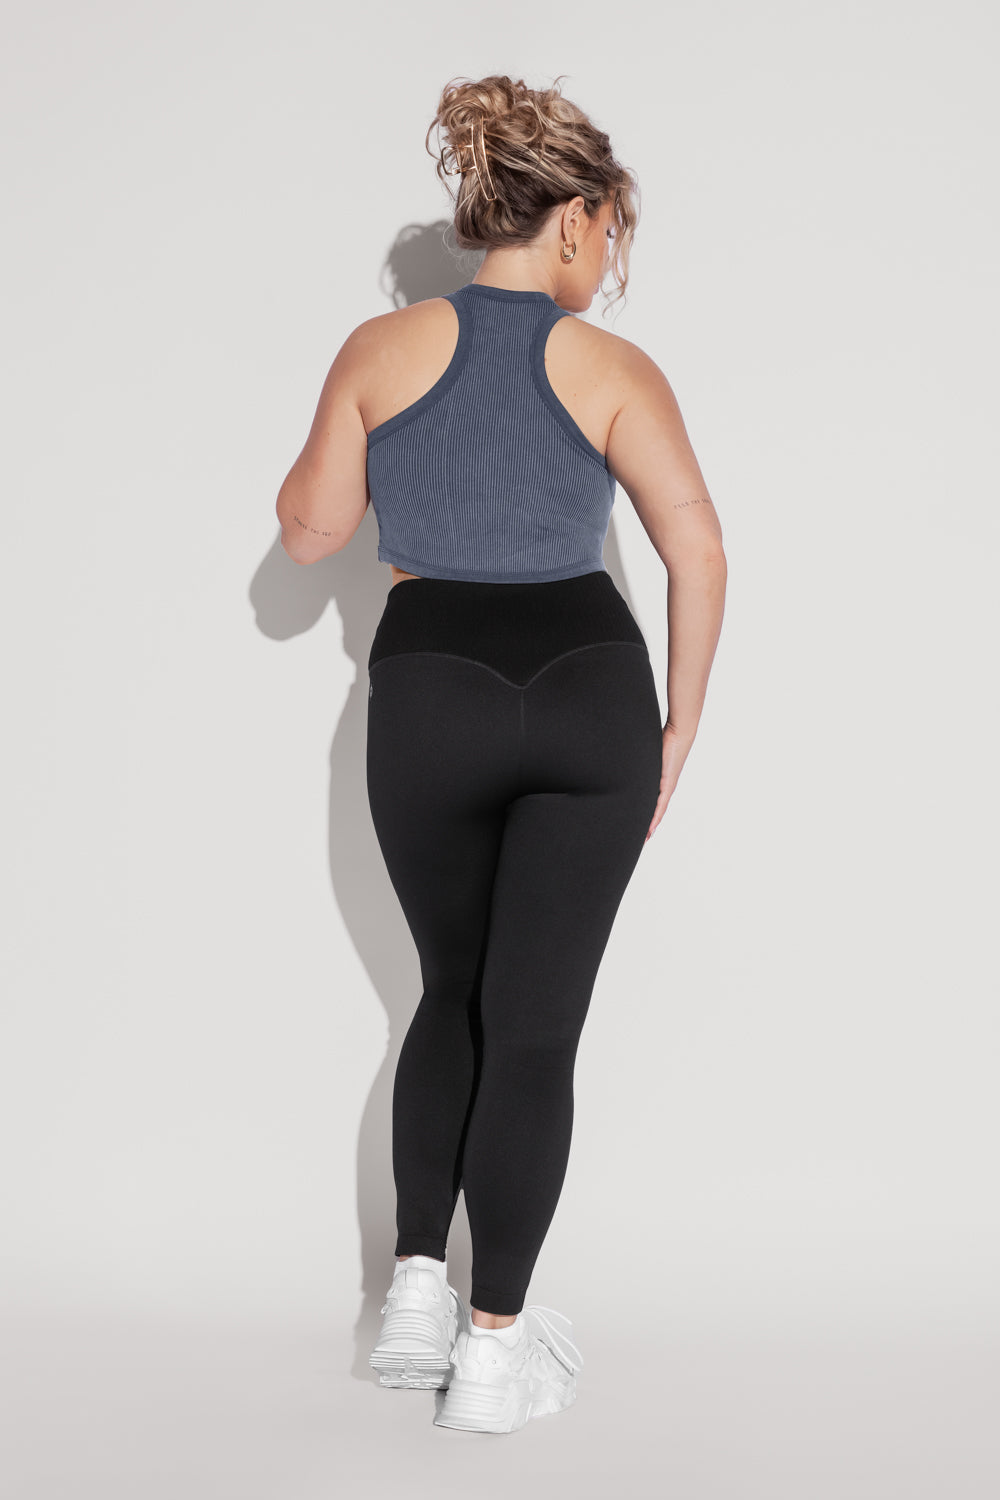 I Tried the Always Sold Out Supersculpt Legging. Here's What